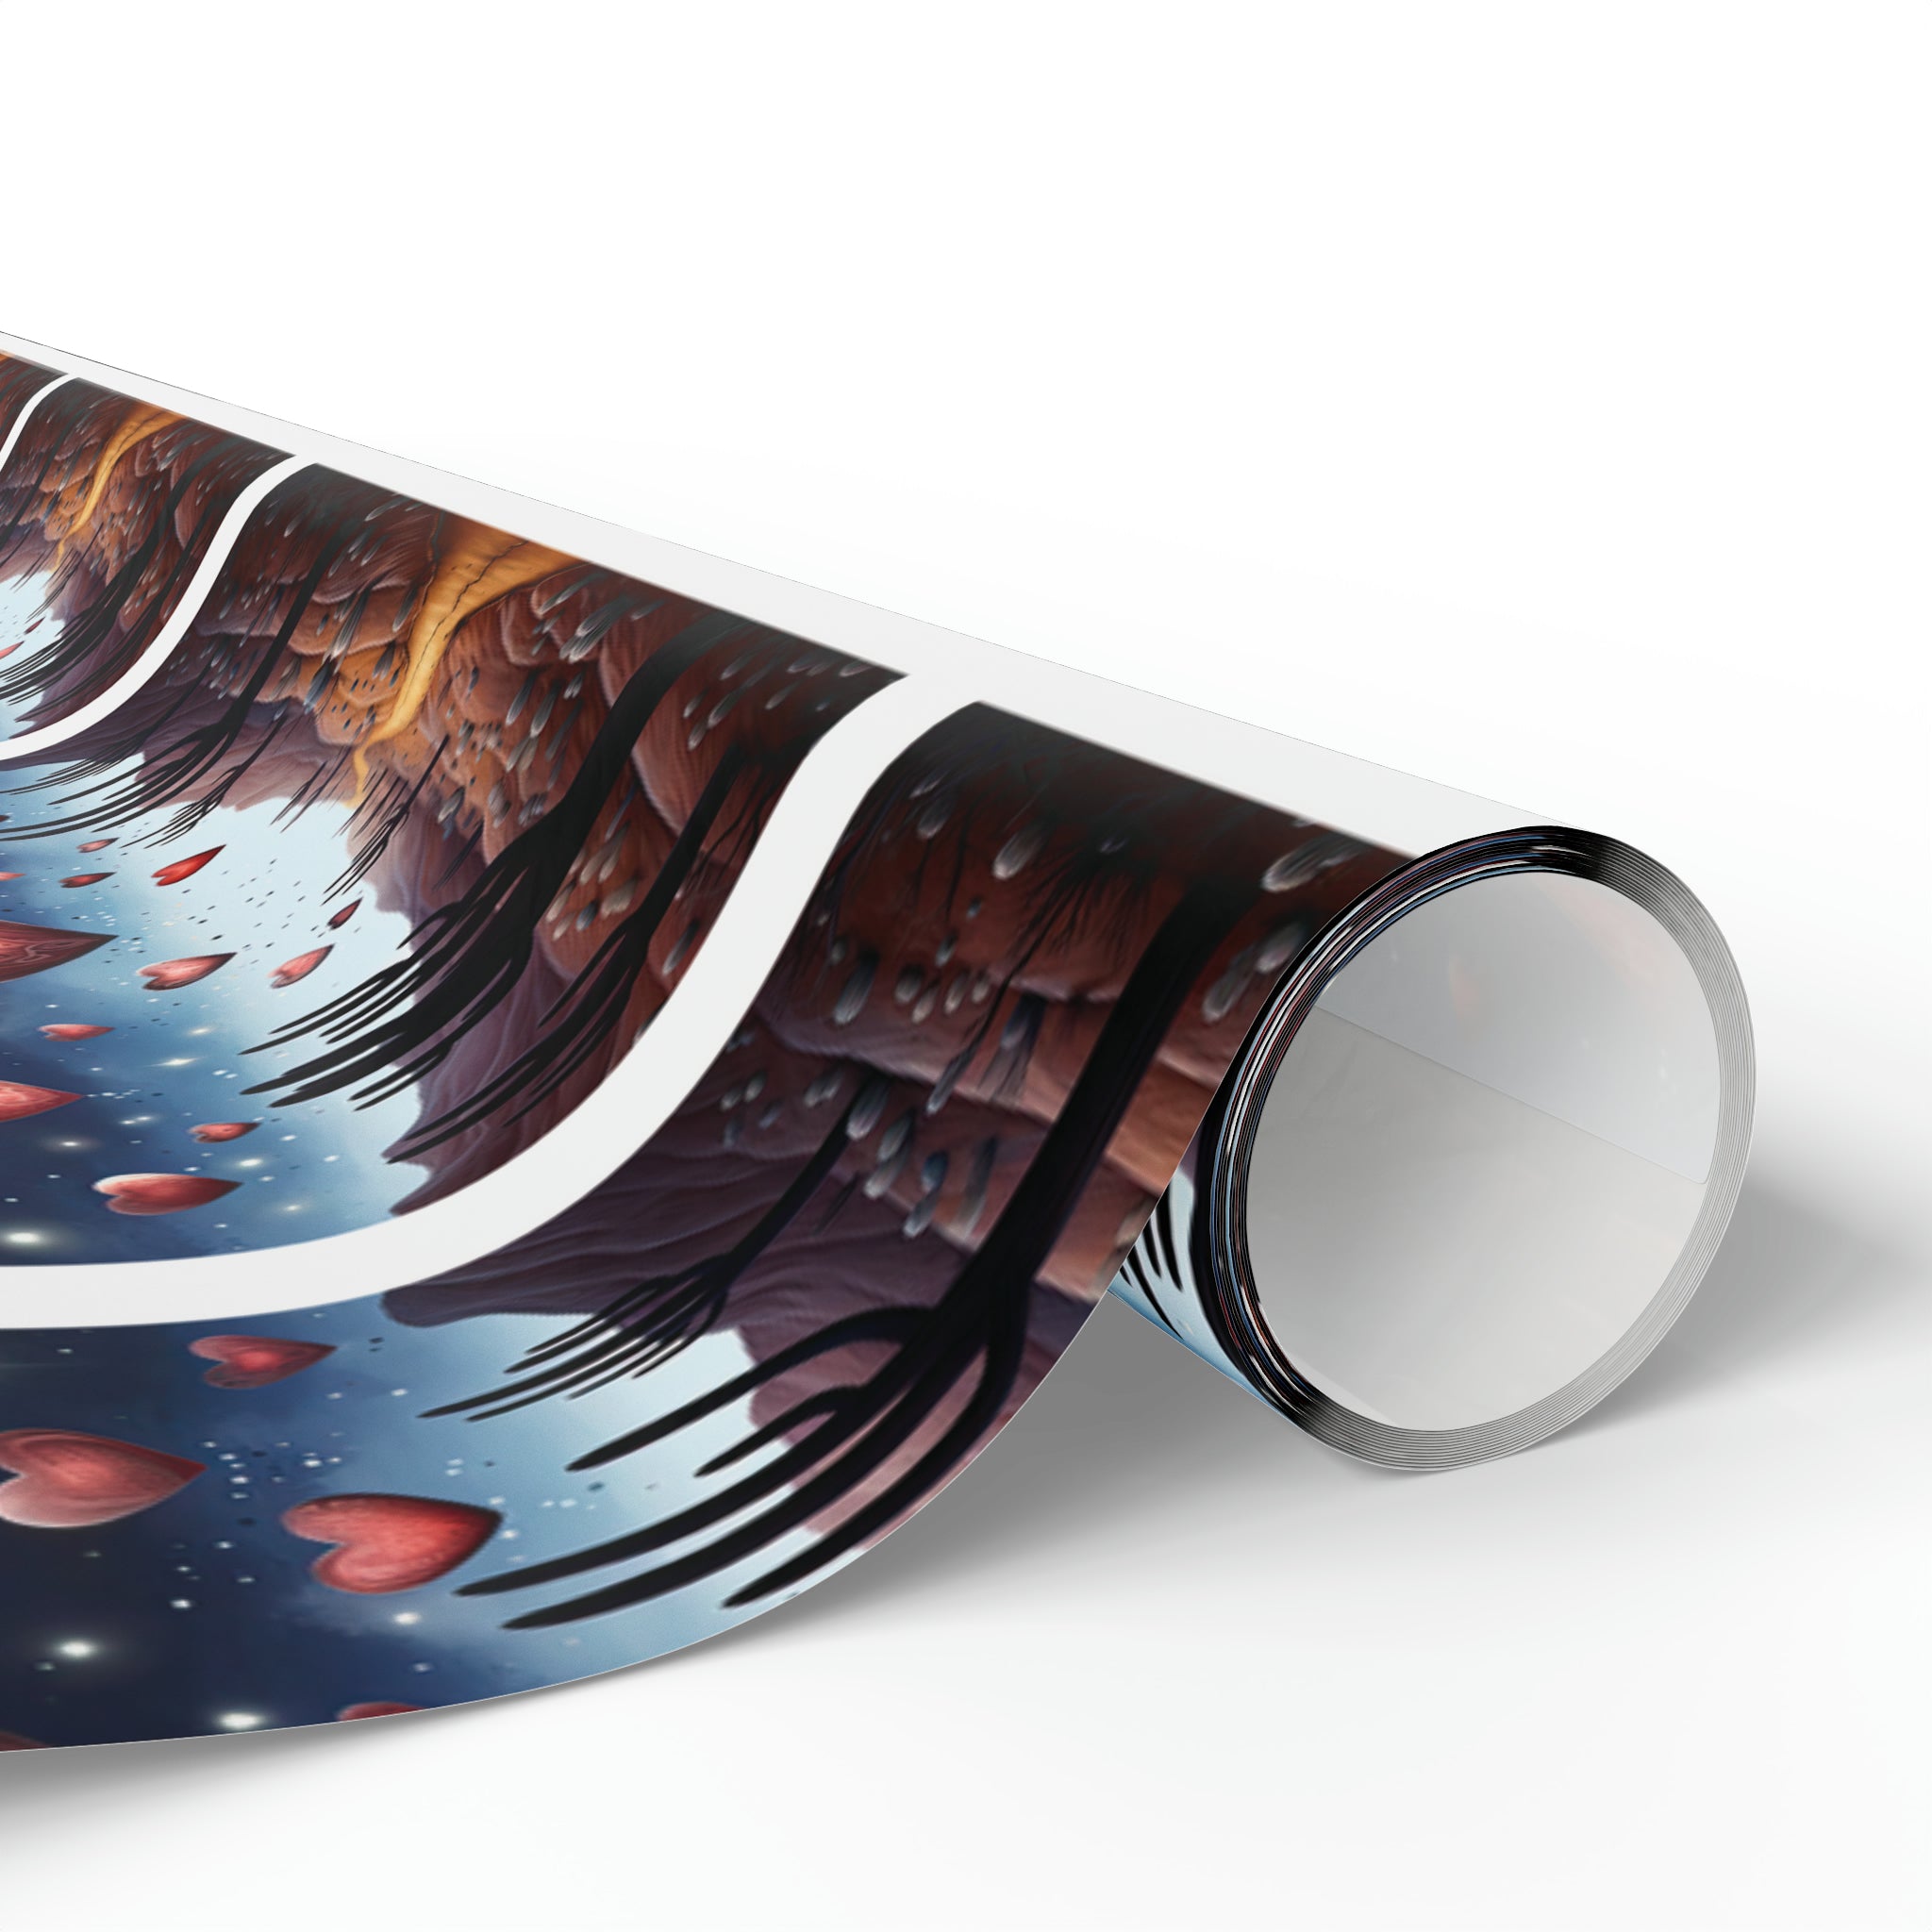 Starry Embrace: Desert Love Wrapping Paper